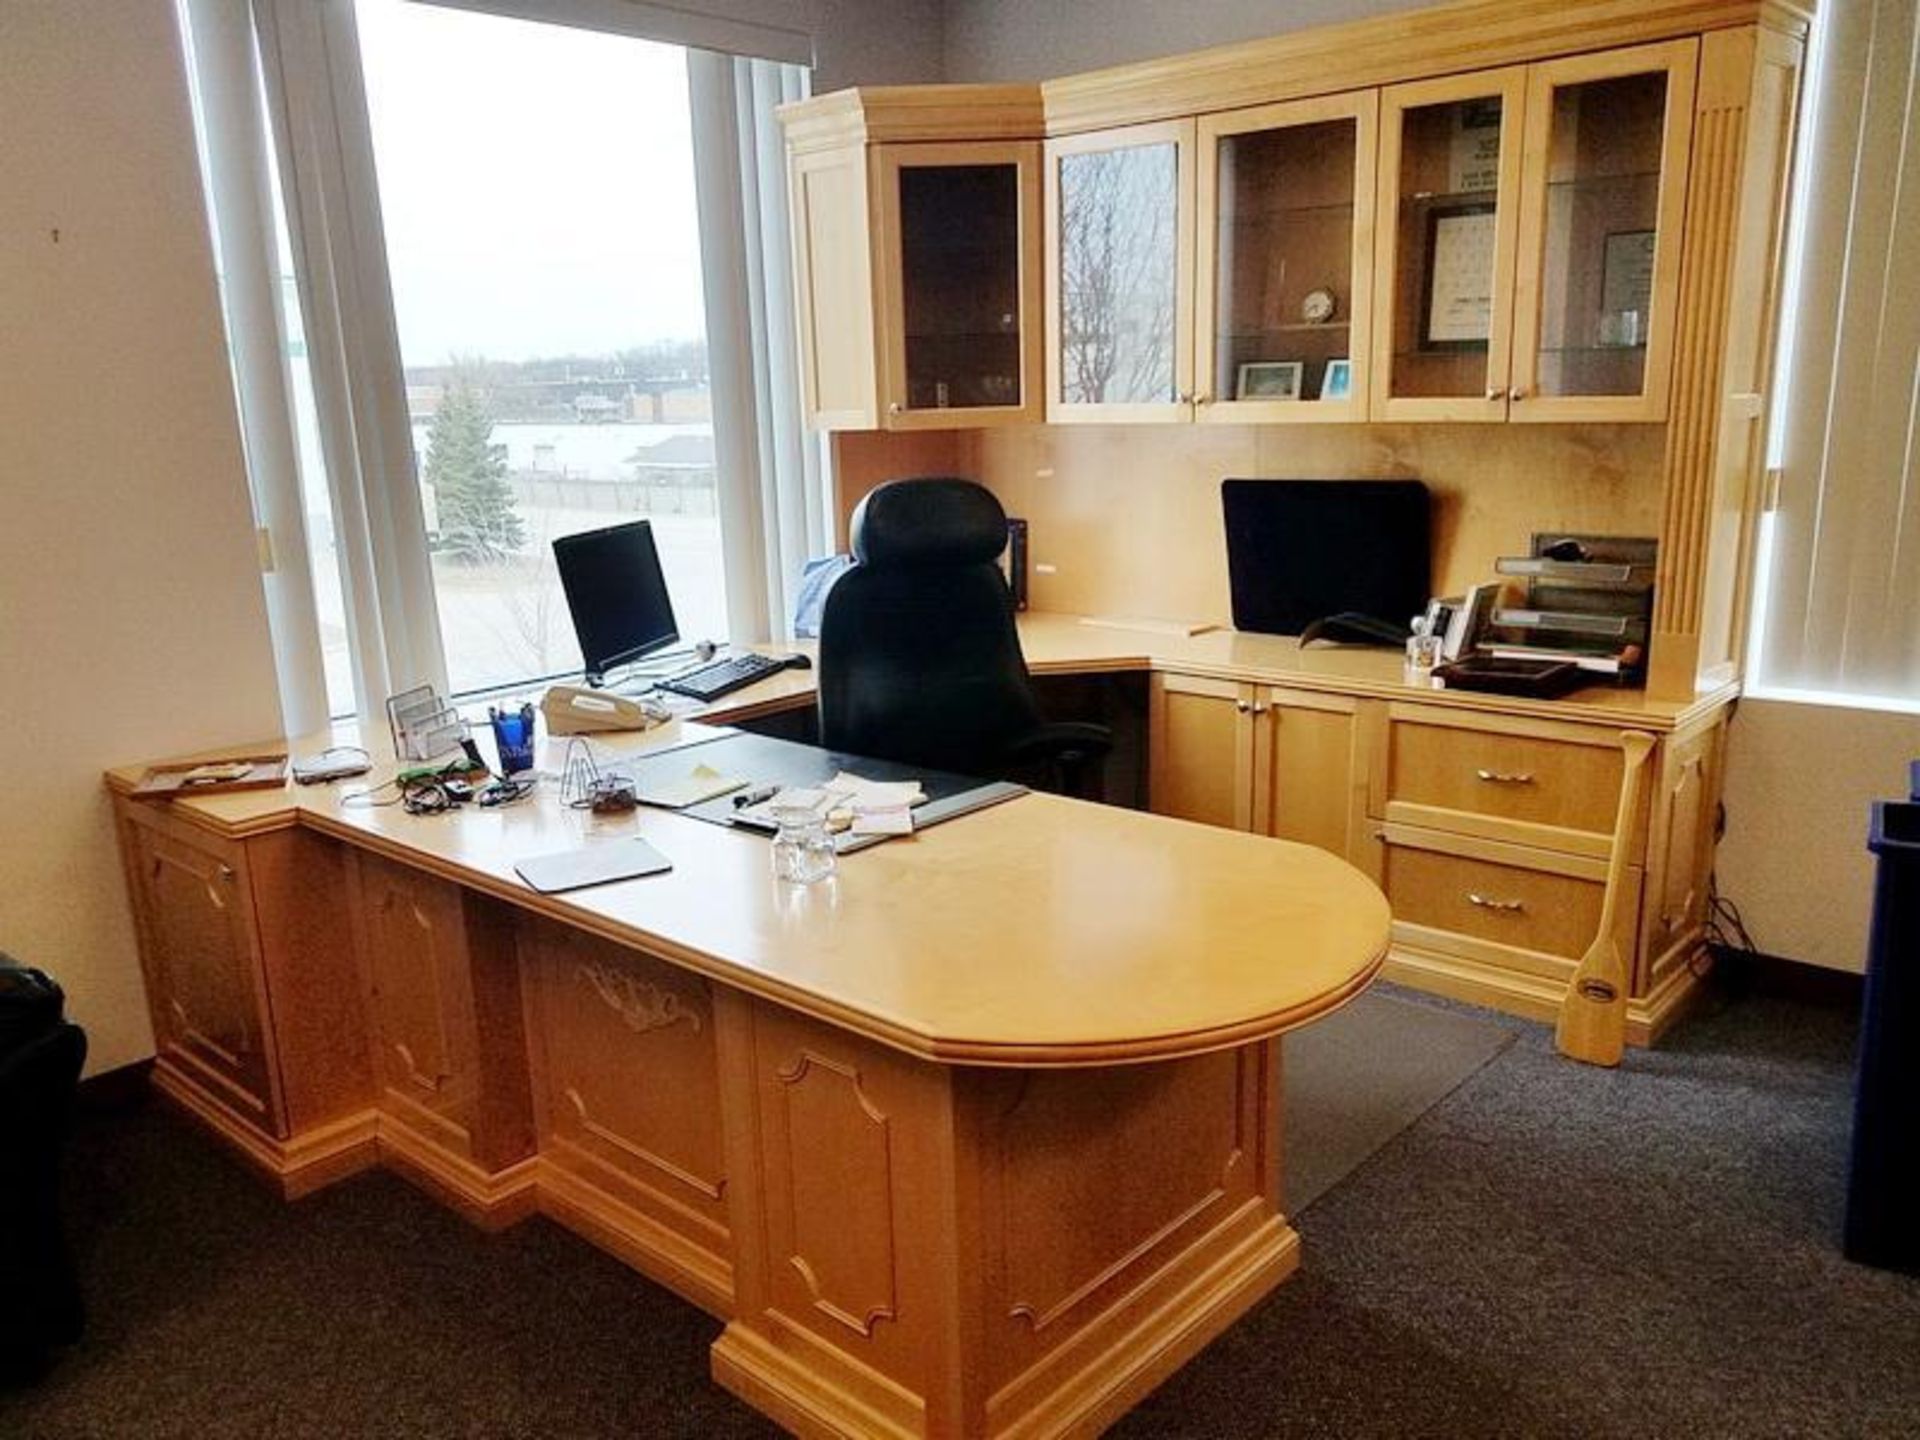 Lot Executive Office Furnishings, No Contents - Image 7 of 10